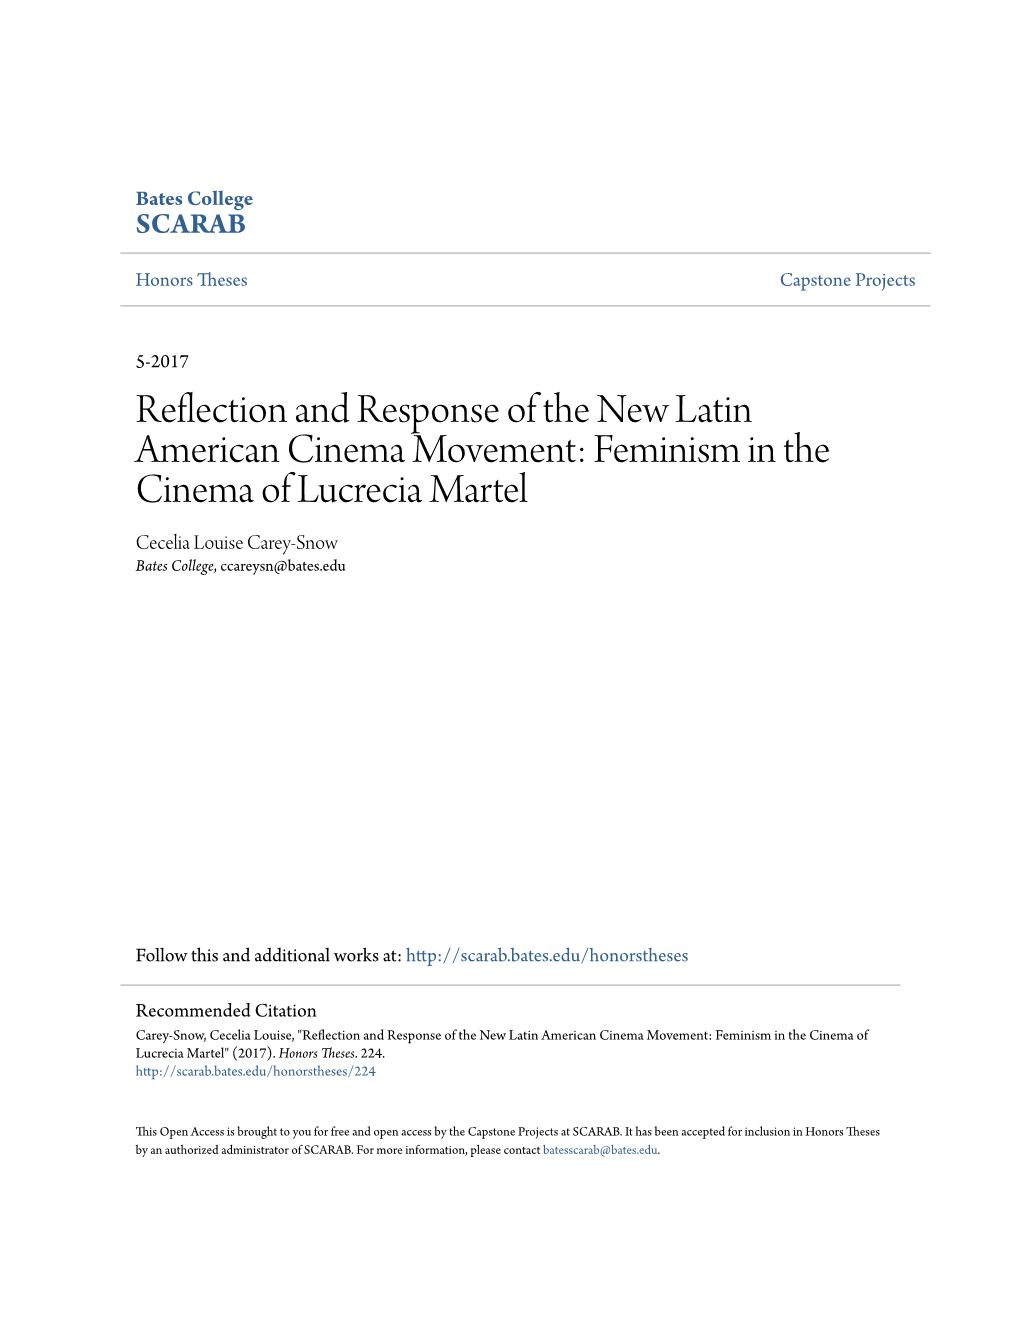 Reflection and Response of the New Latin American Cinema Movement